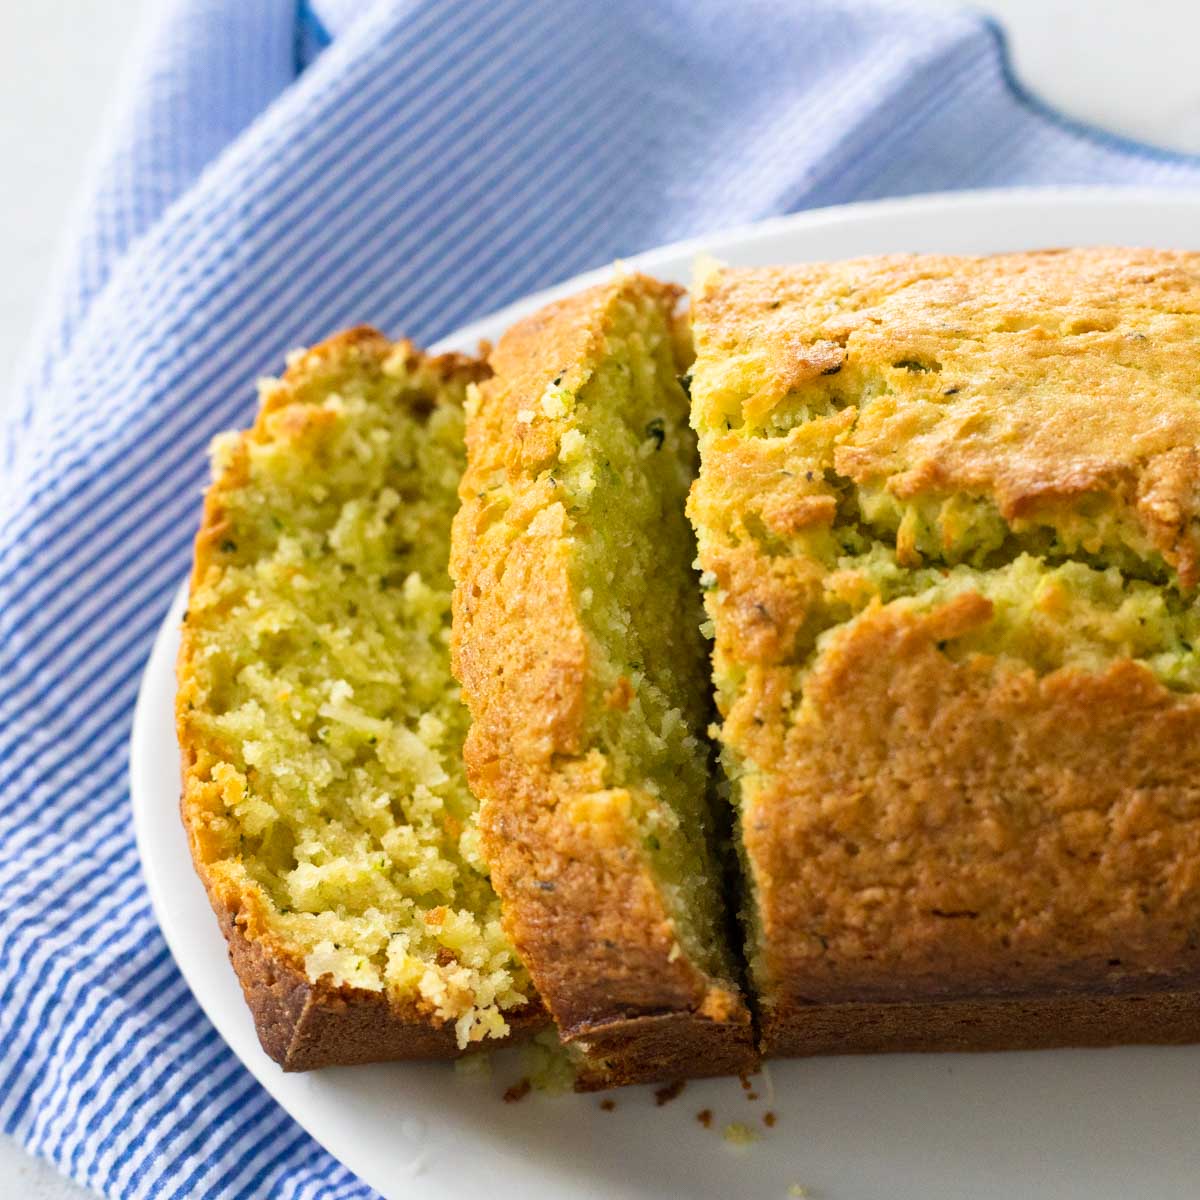 A loaf of pineapple zucchini bread has been sliced to show the texture of the bread.